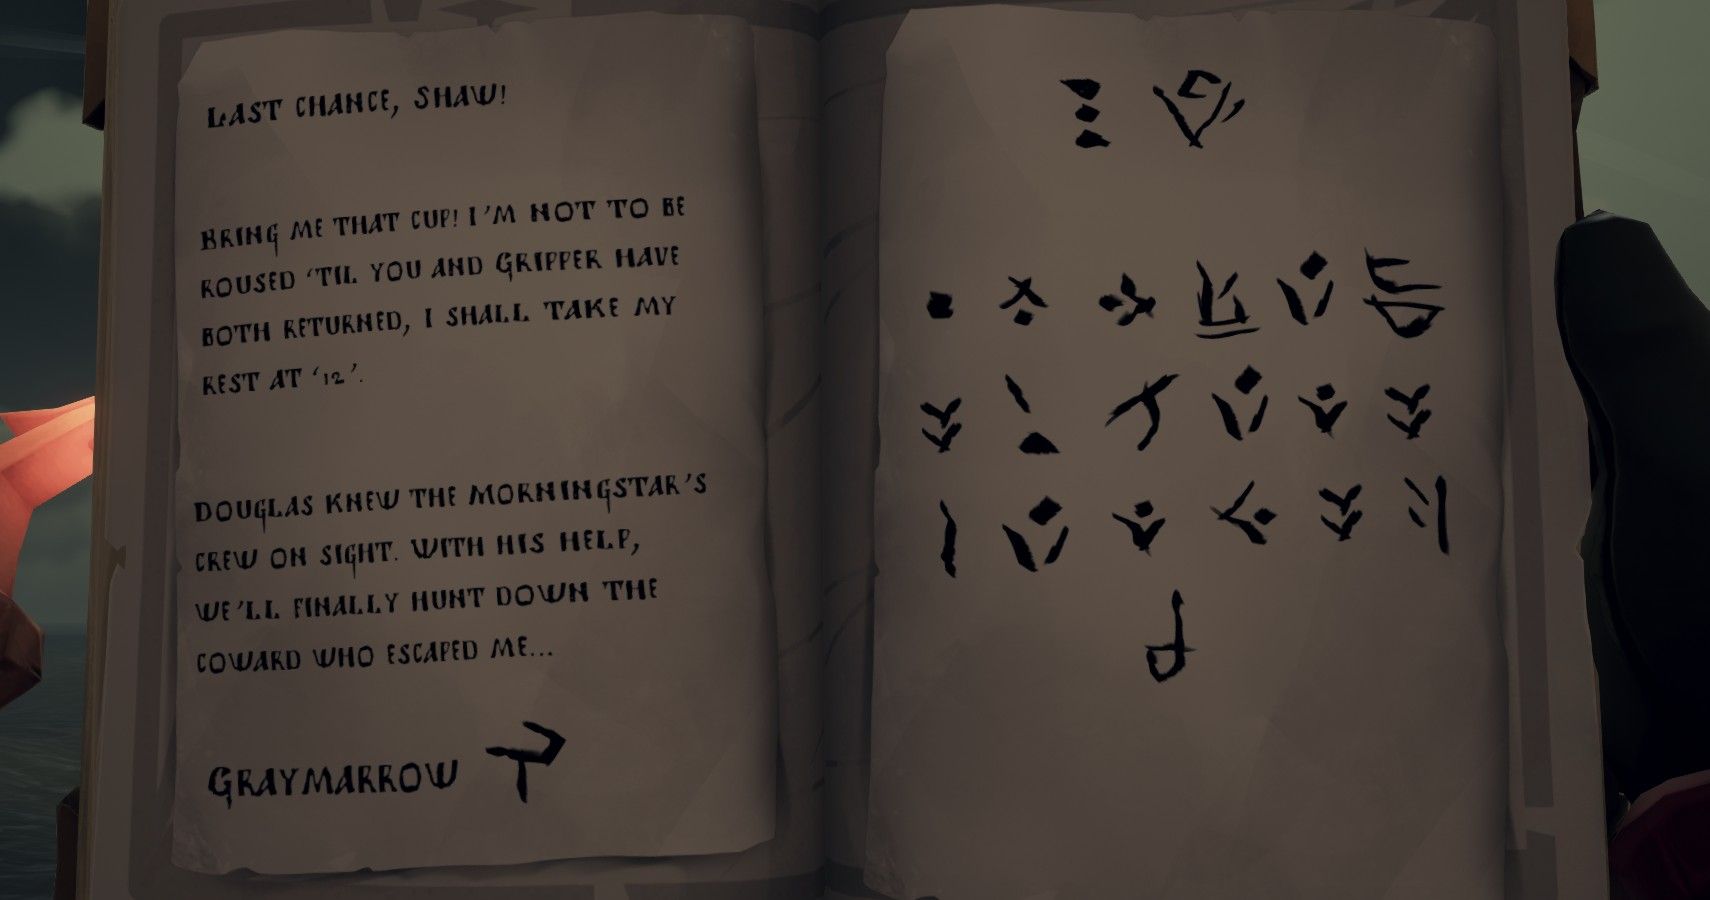 Another Graymarrow Ledger in Sea of Thieves